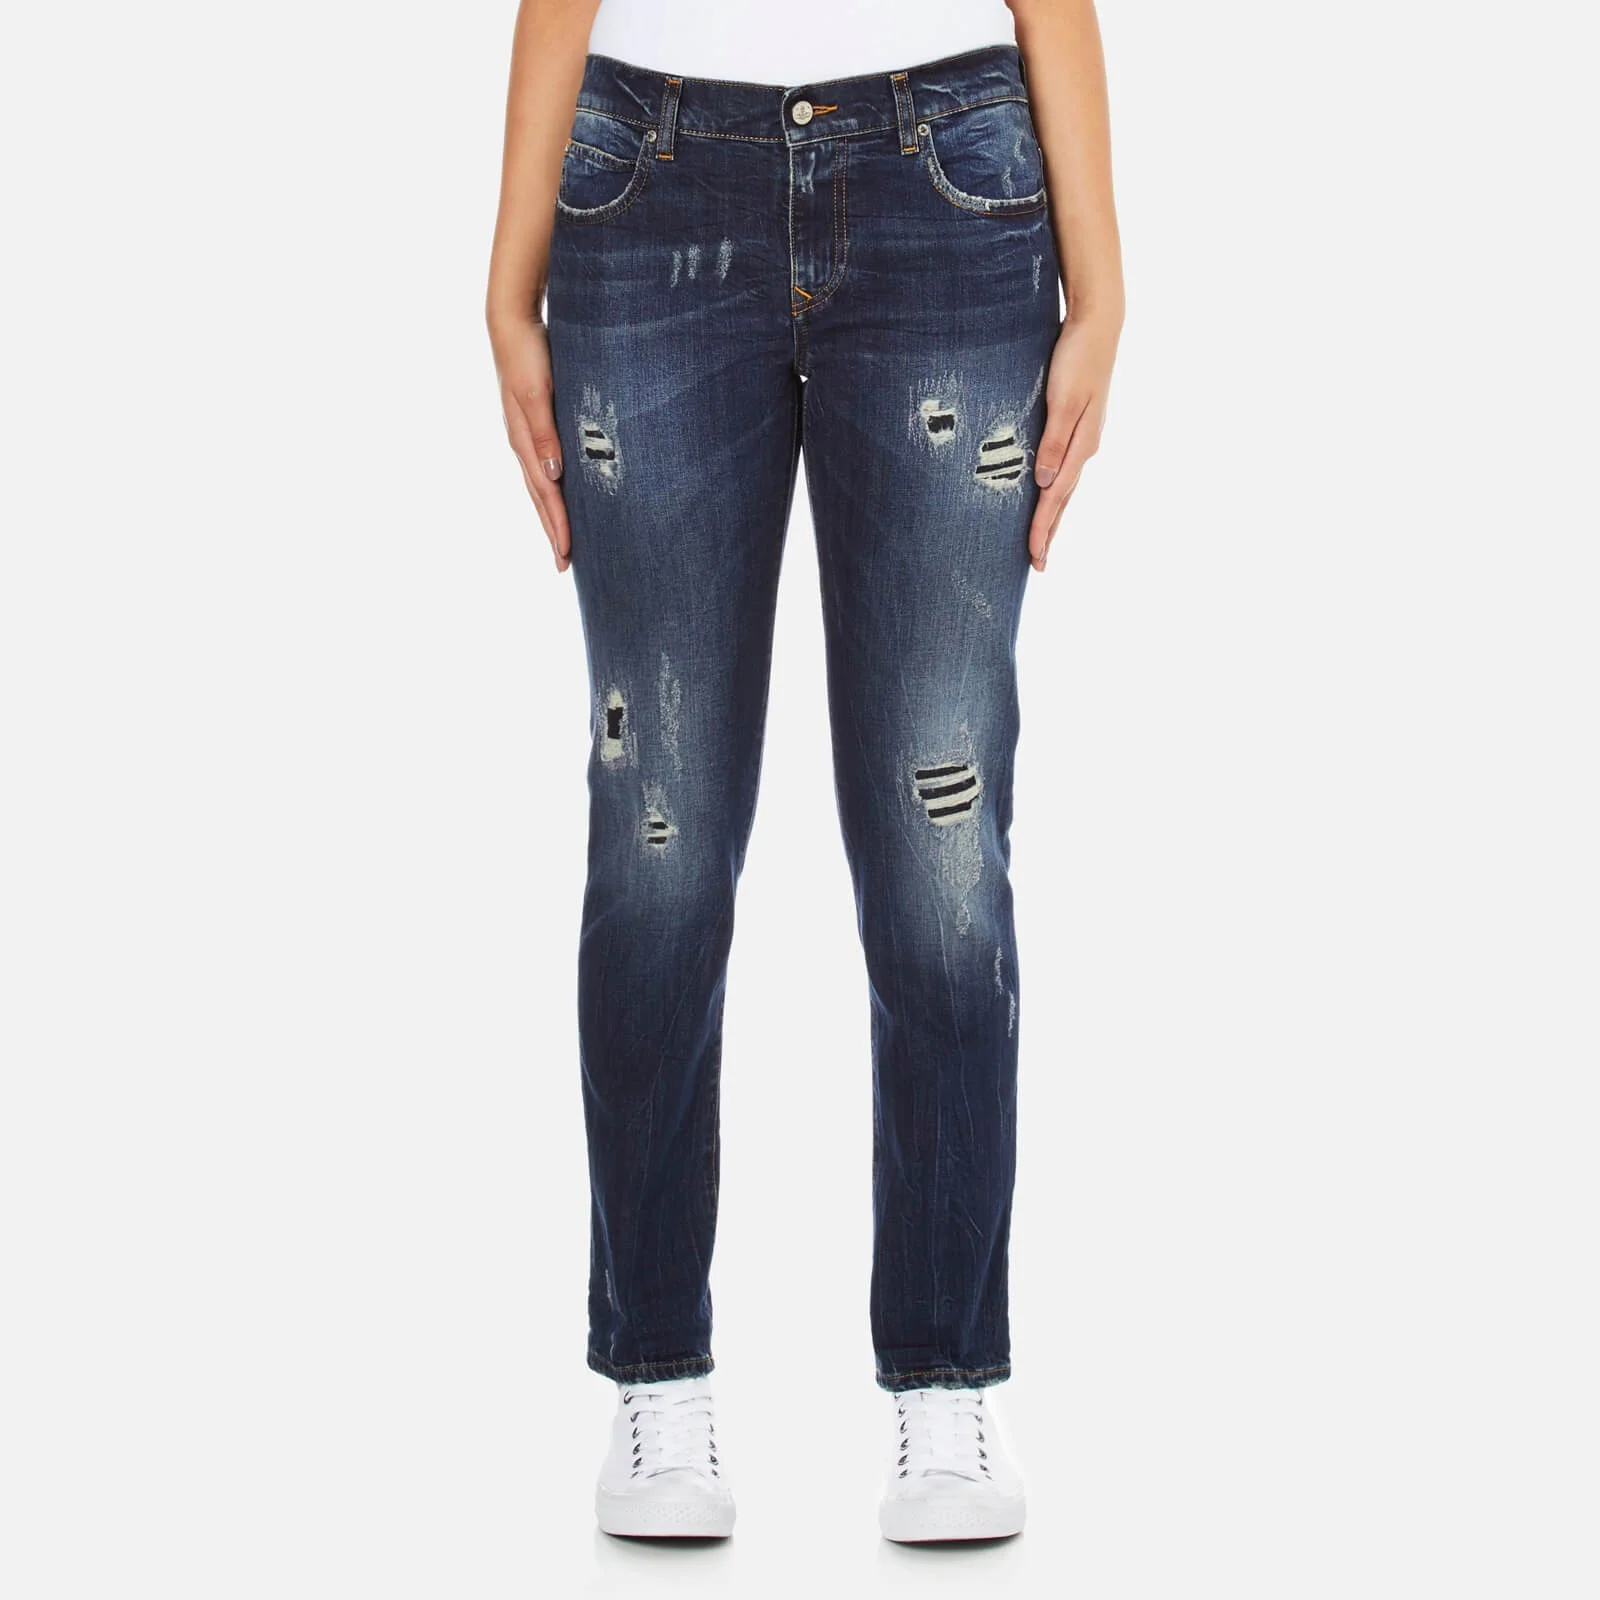 Vivienne Westwood Anglomania Women's New Billy Organic Jeans - Distressed Blue Image 1